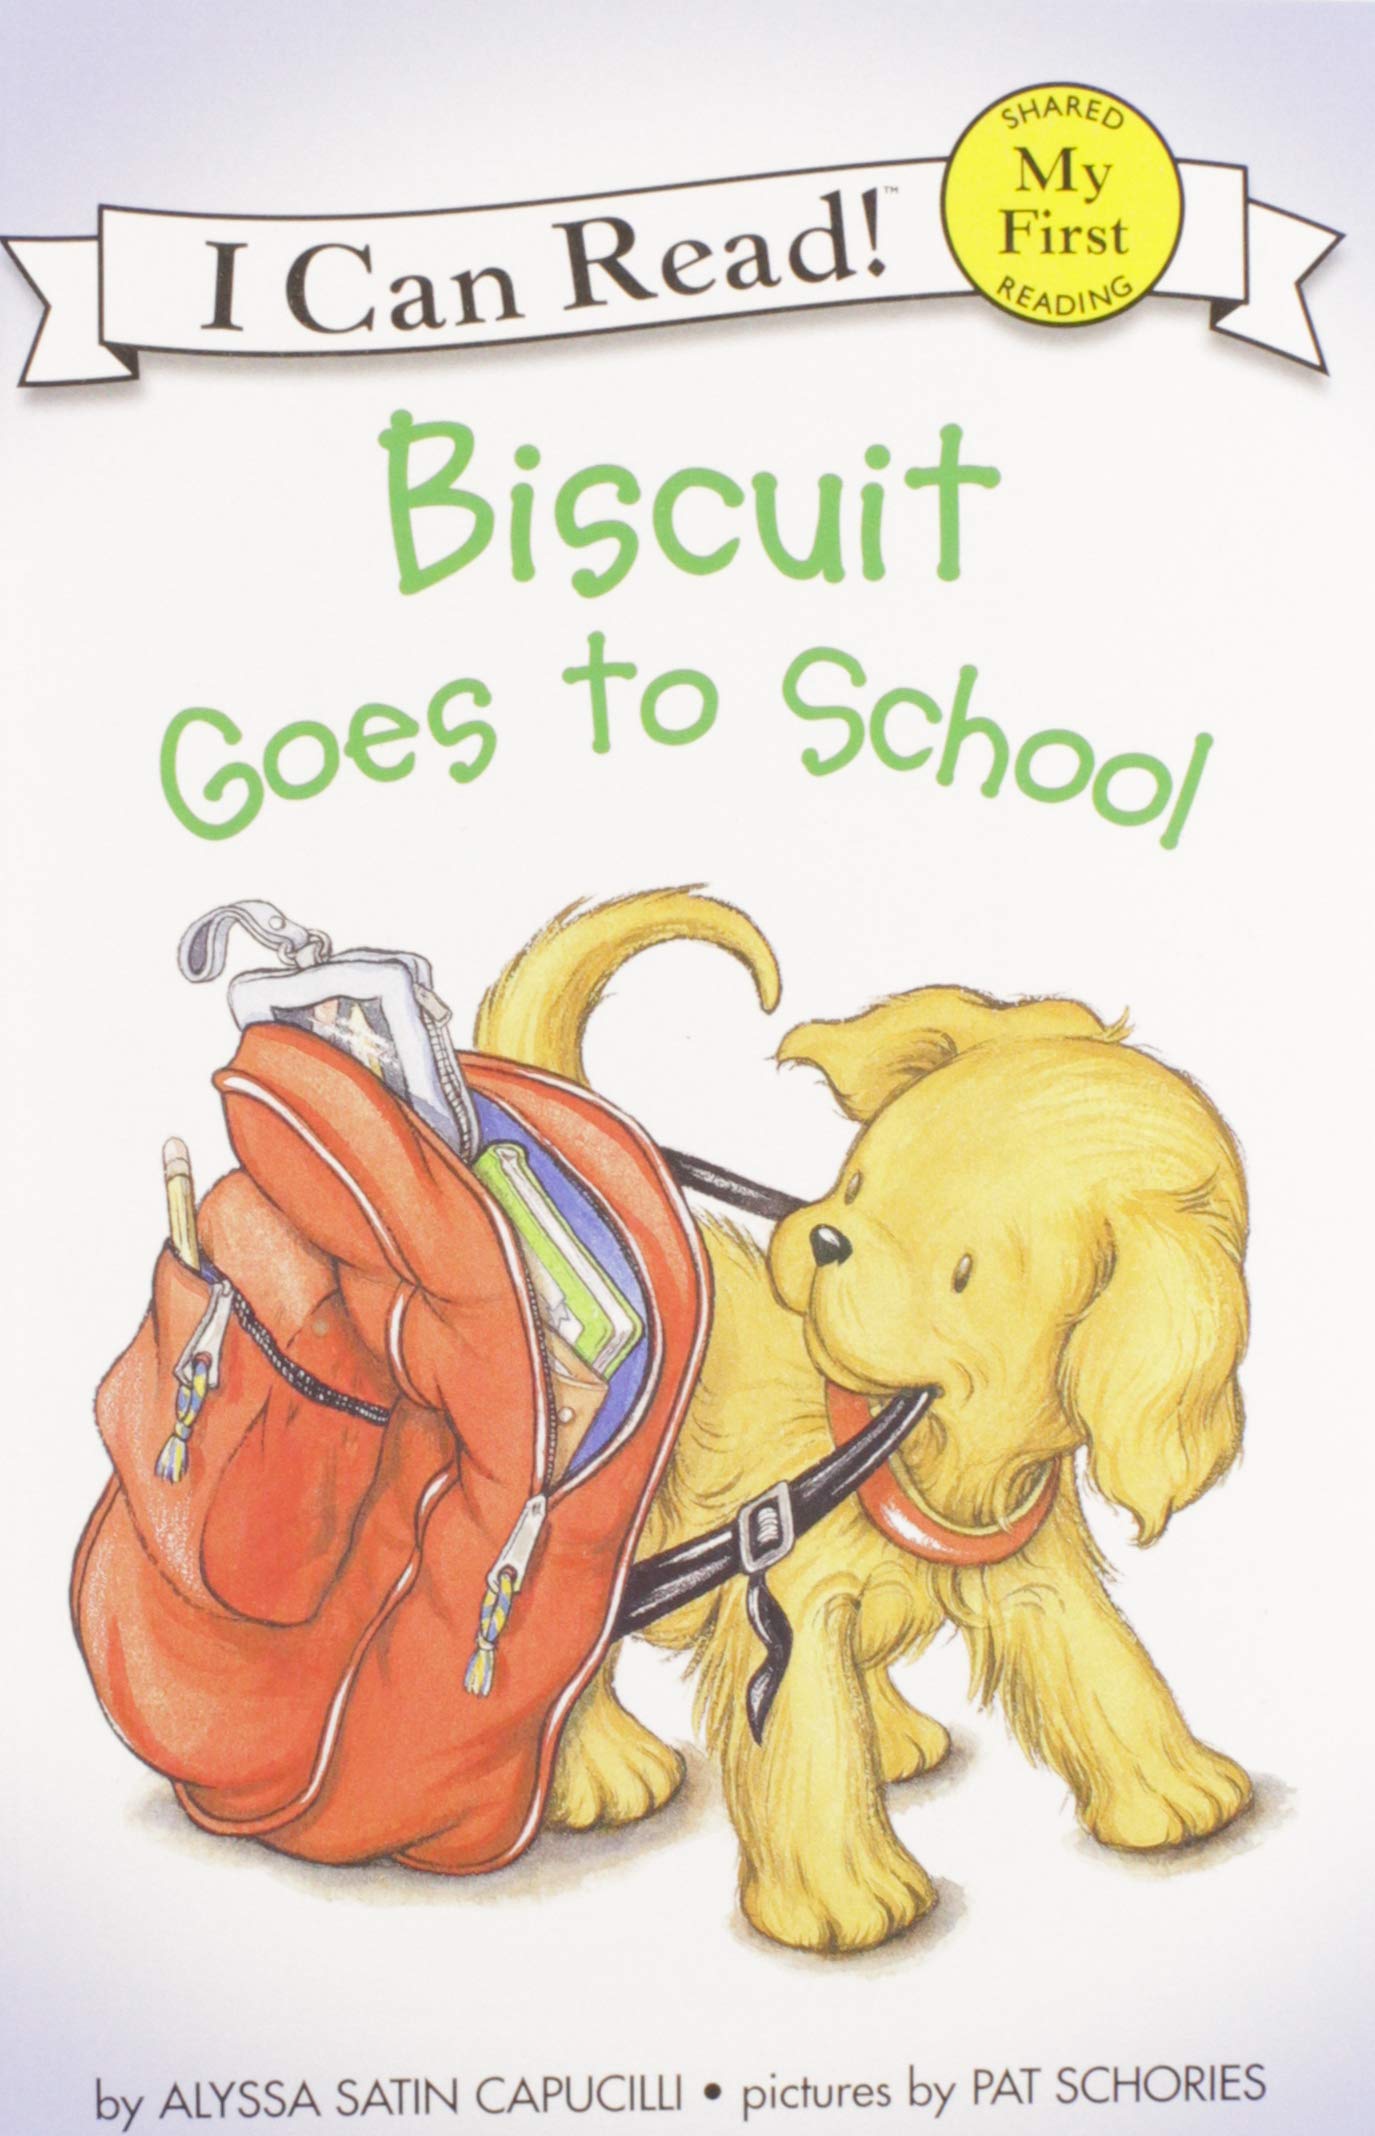 speech and language teaching concepts for Biscuit Goes to School in speech therapy​